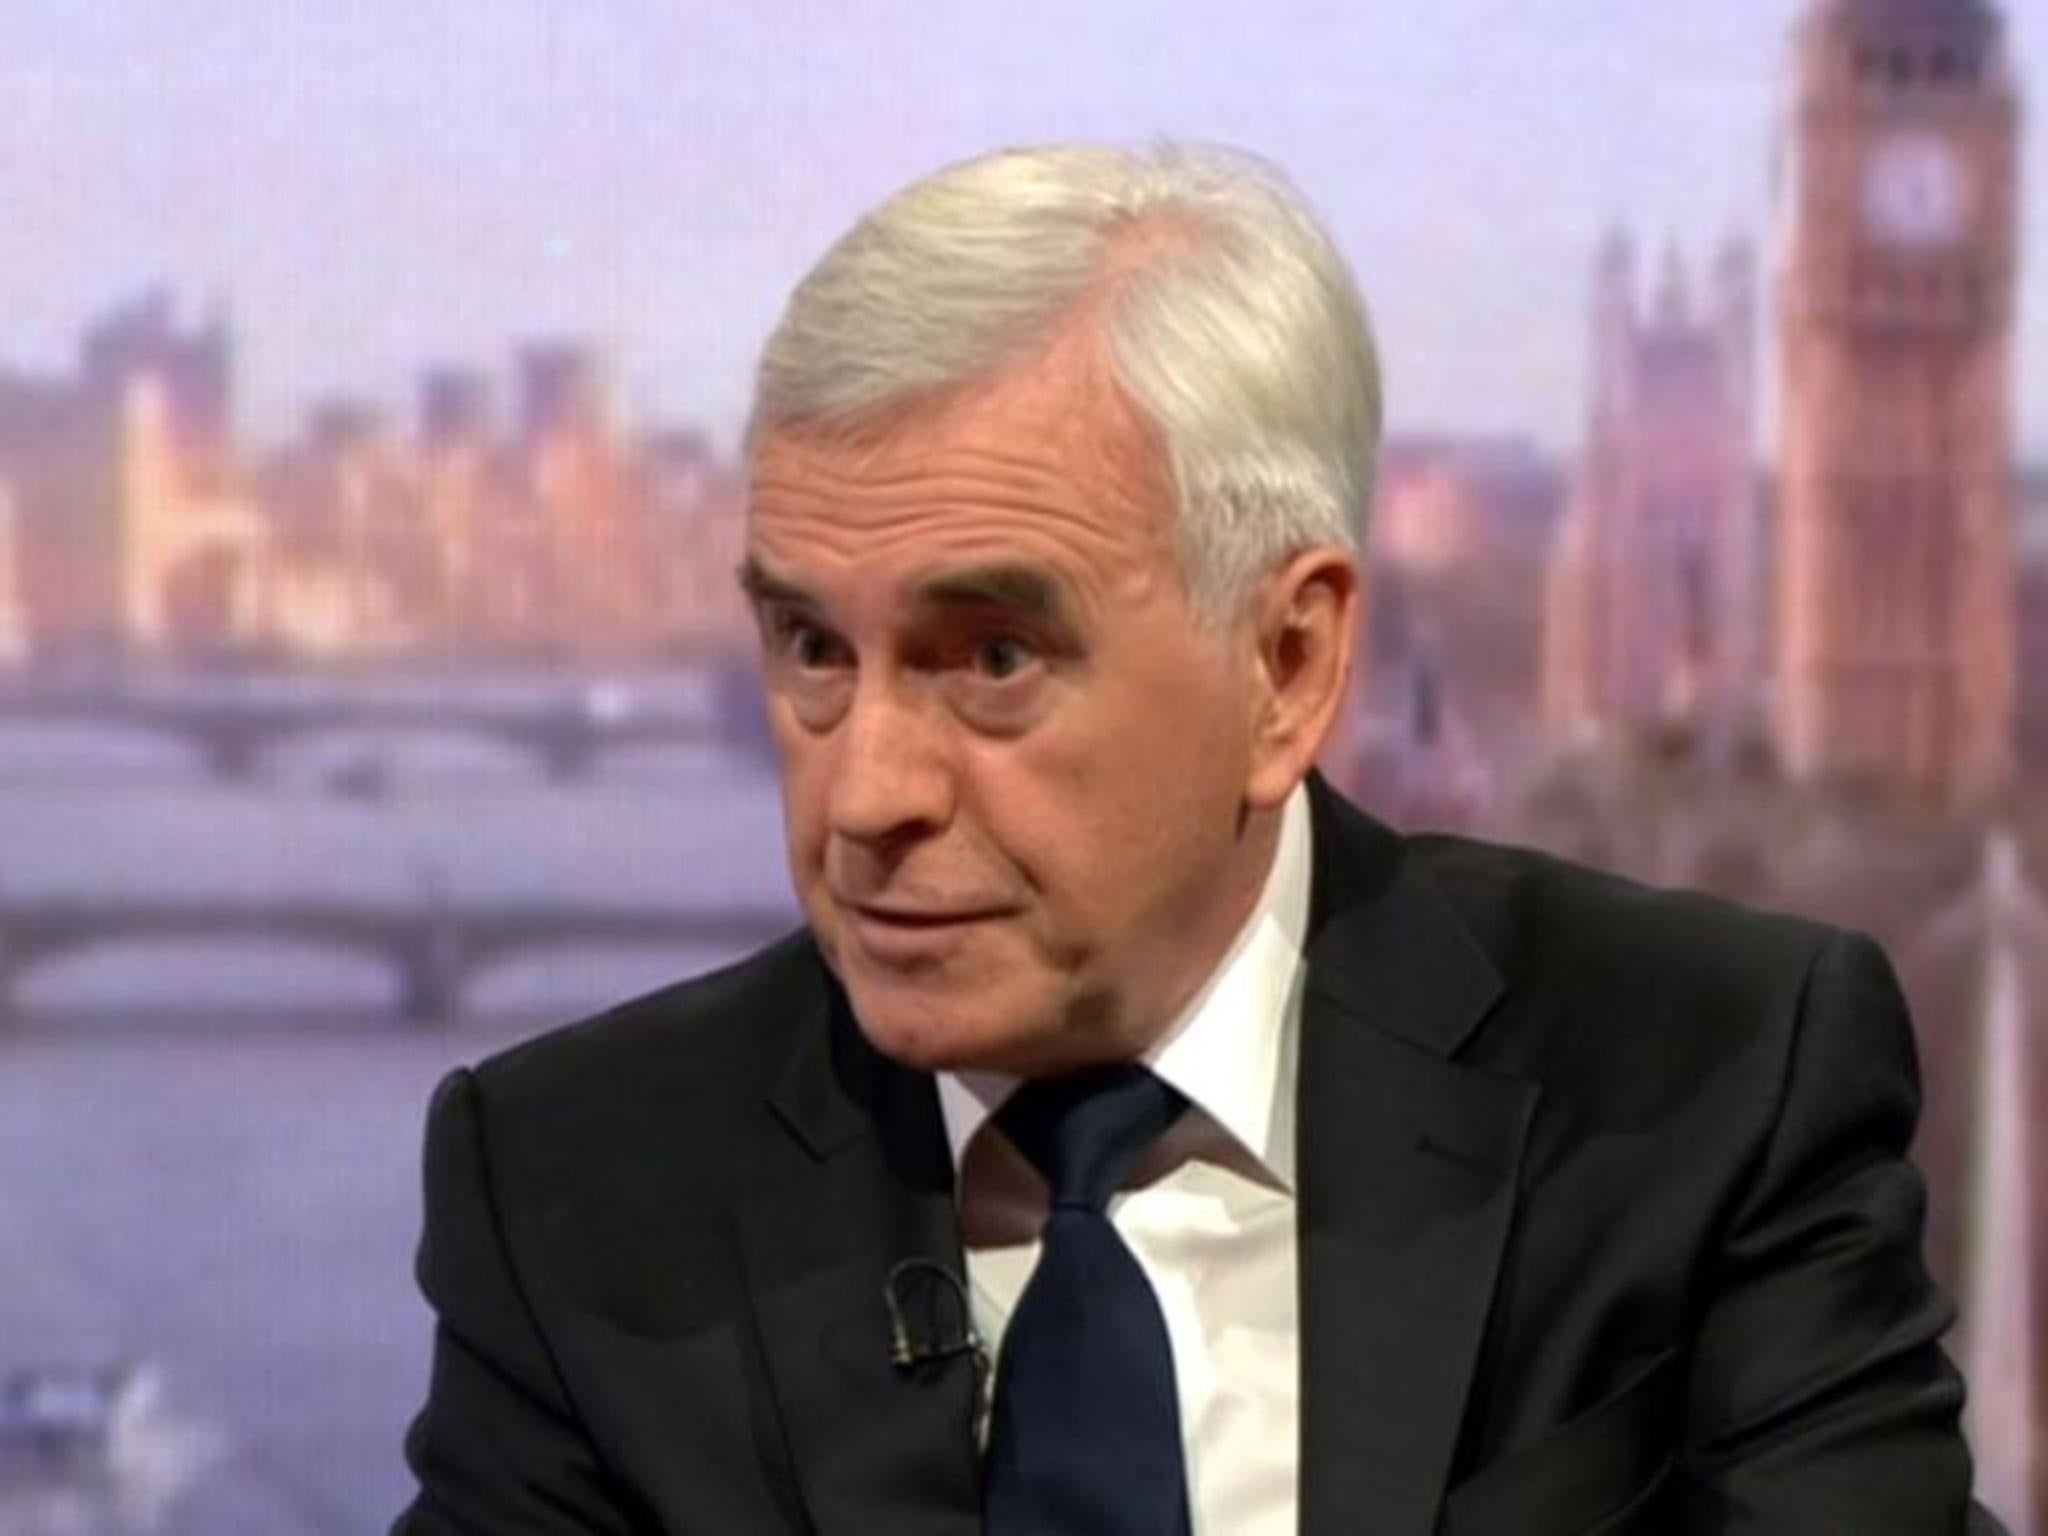 Shadow Chancellor John McDonnell was among those who voted with the government against the amendment